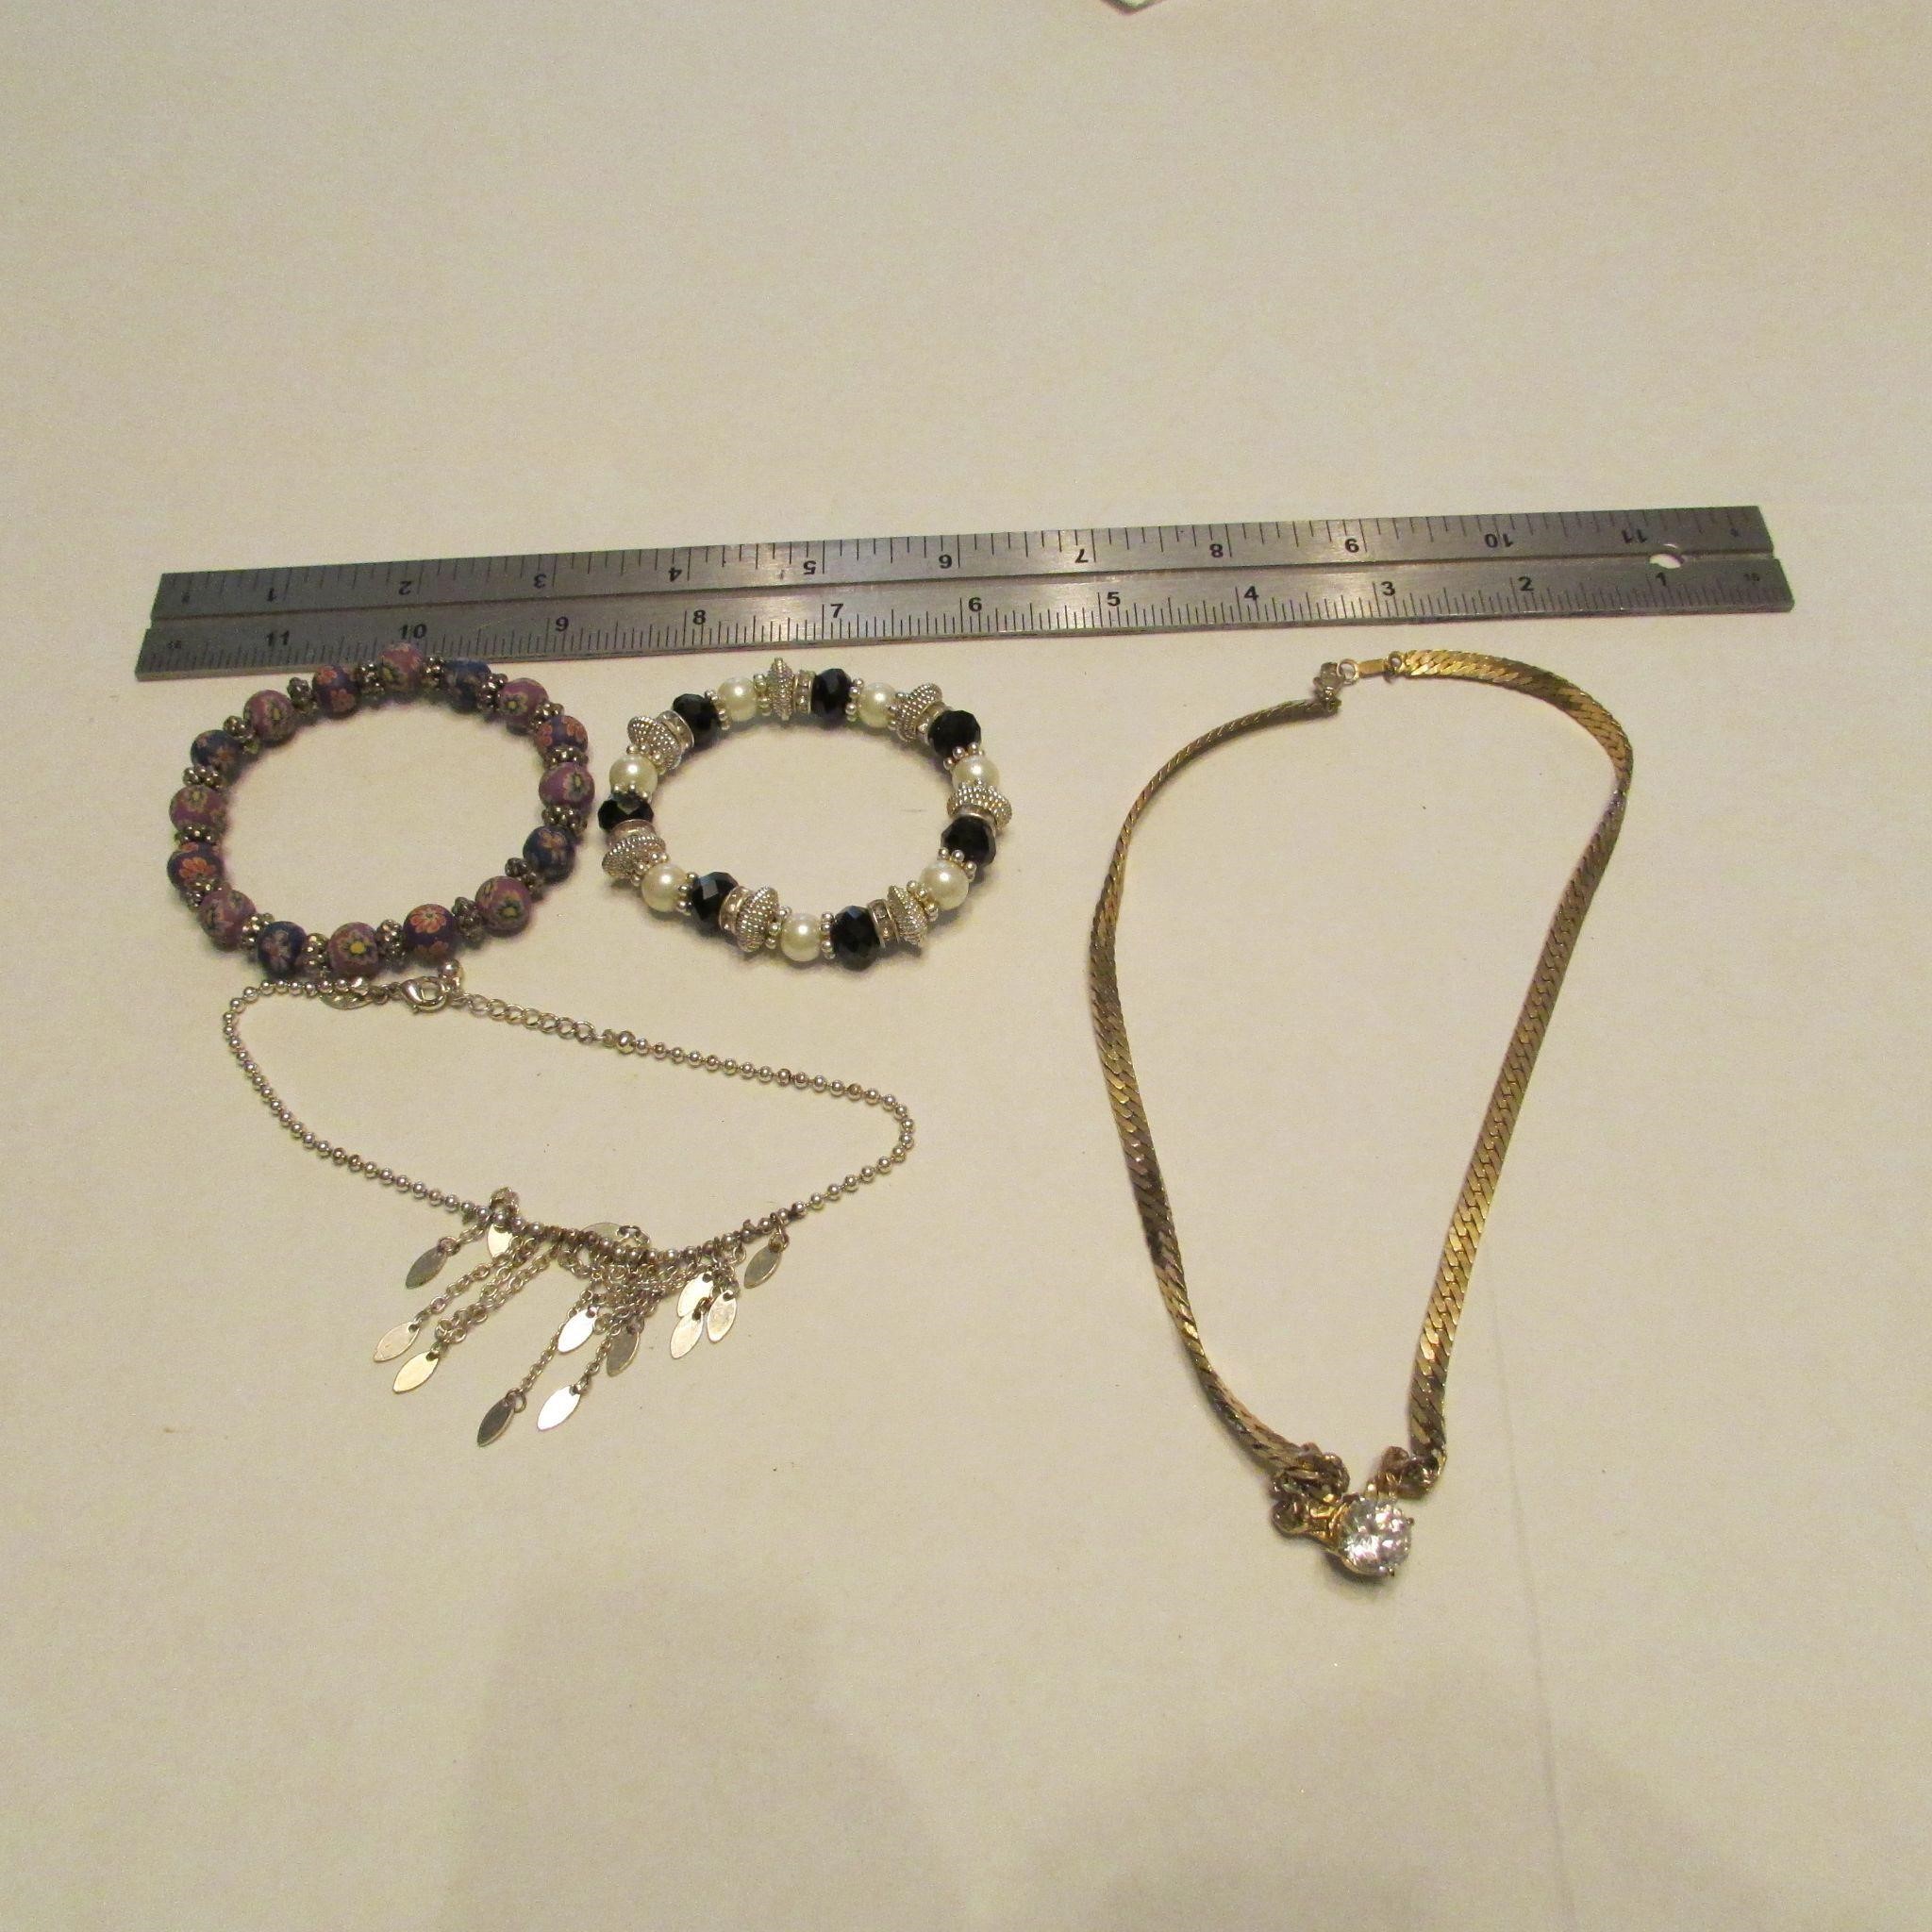 3 bracelets, necklace with clear stone